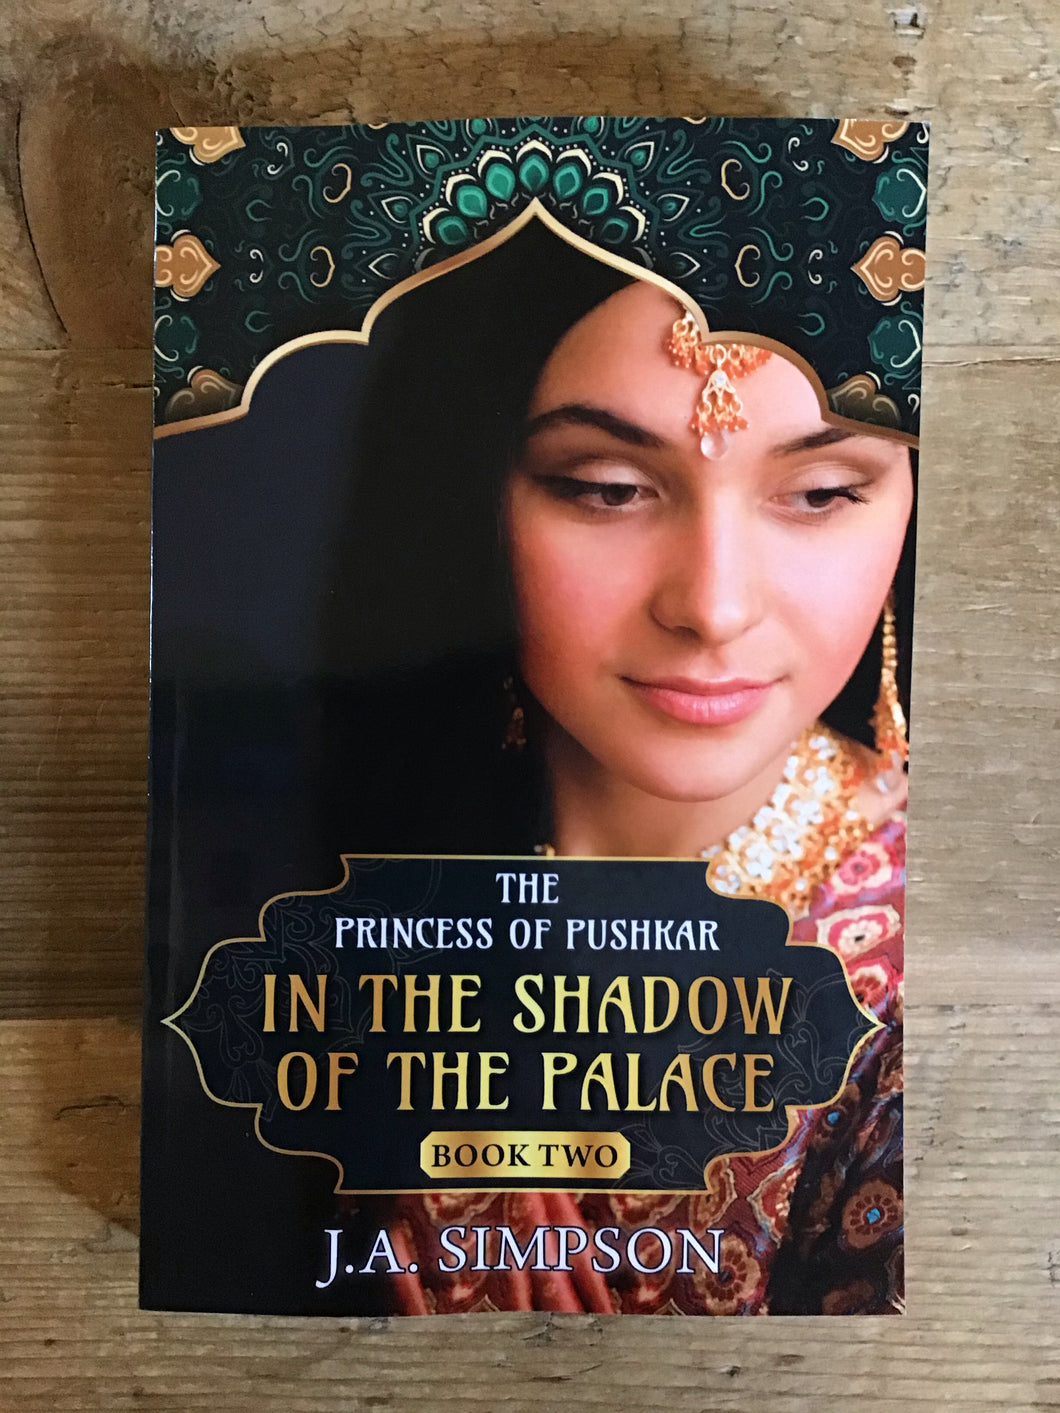 The Princess of Pushkar: In the Shadow of the Palace (book two)